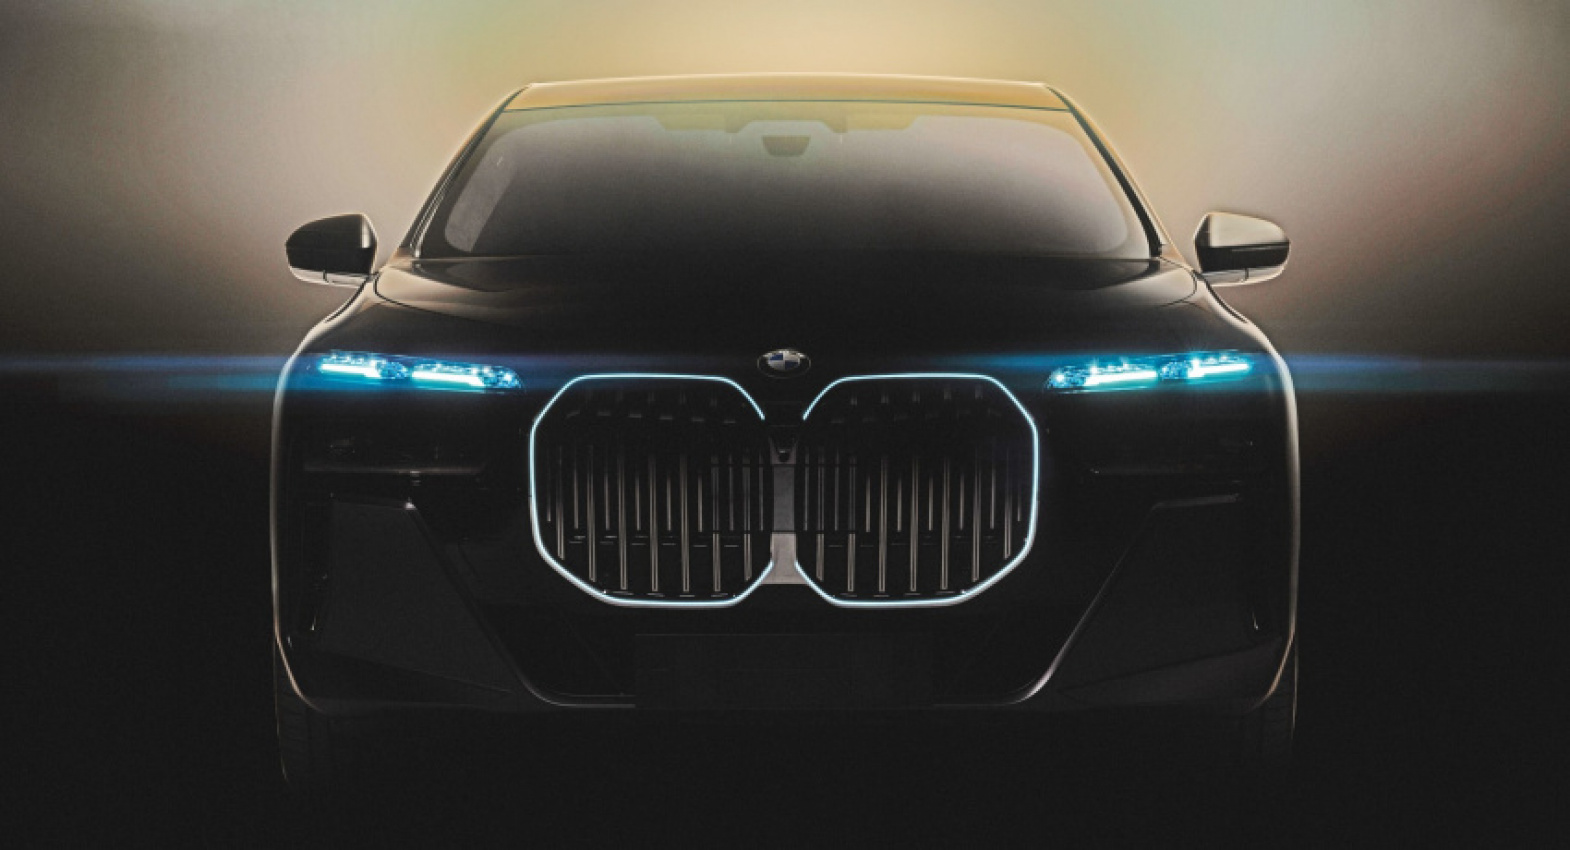 audi, autos, bmw, cars, maserati, news, weekly brief, ev audi avant concept, bmw i7 teaser, and maserati granturismo folgore previewed: your weekly brief